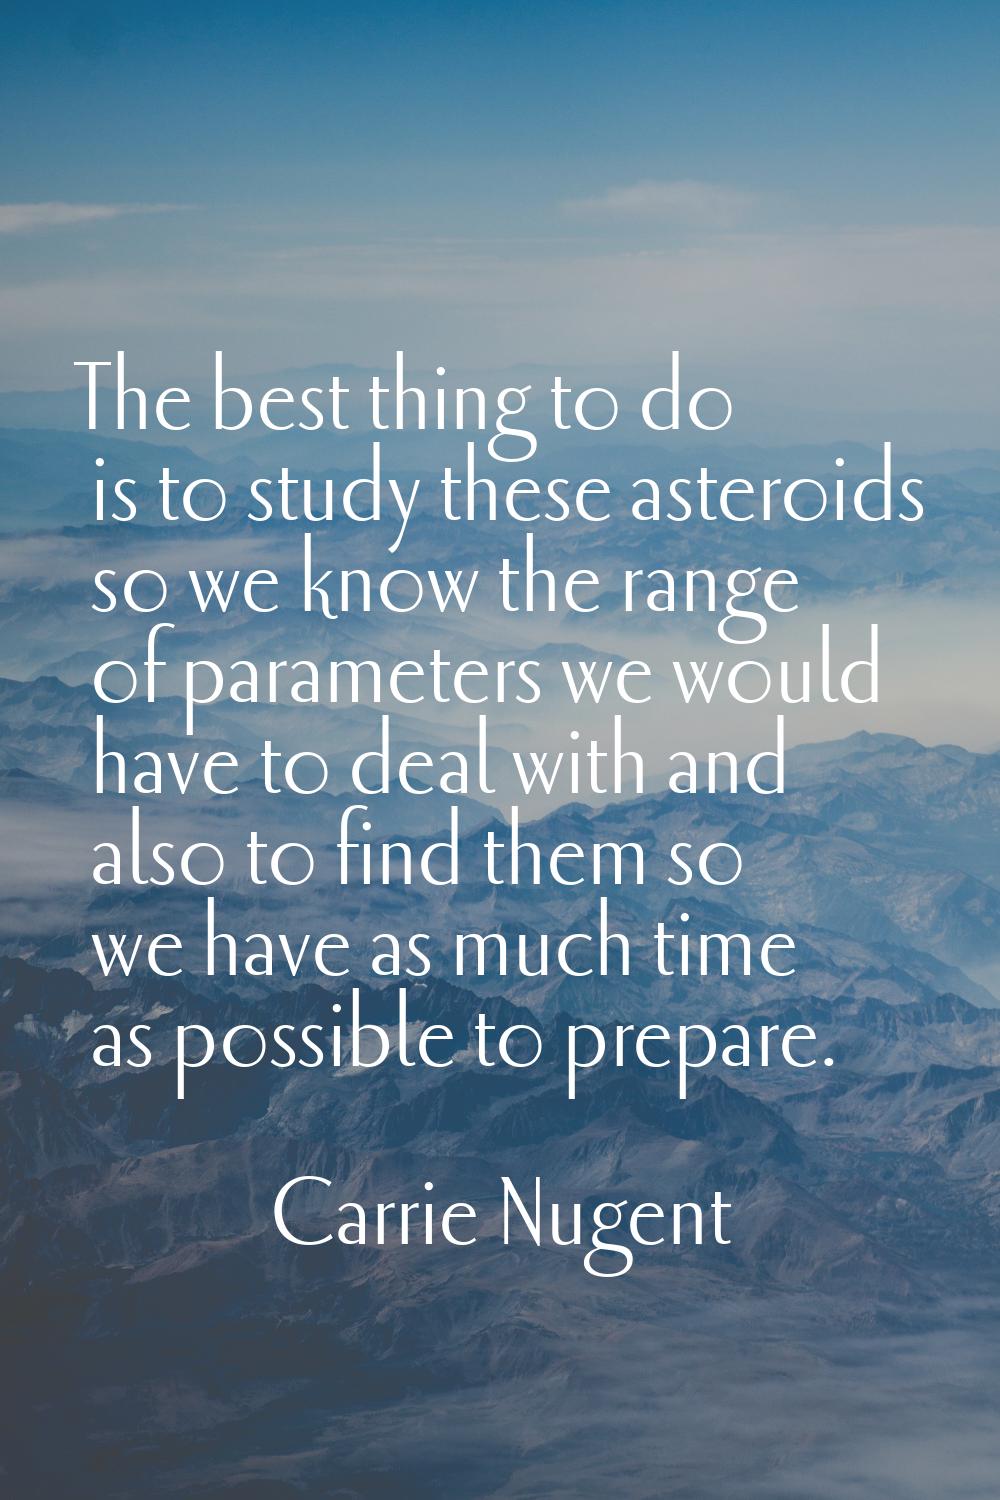 The best thing to do is to study these asteroids so we know the range of parameters we would have t